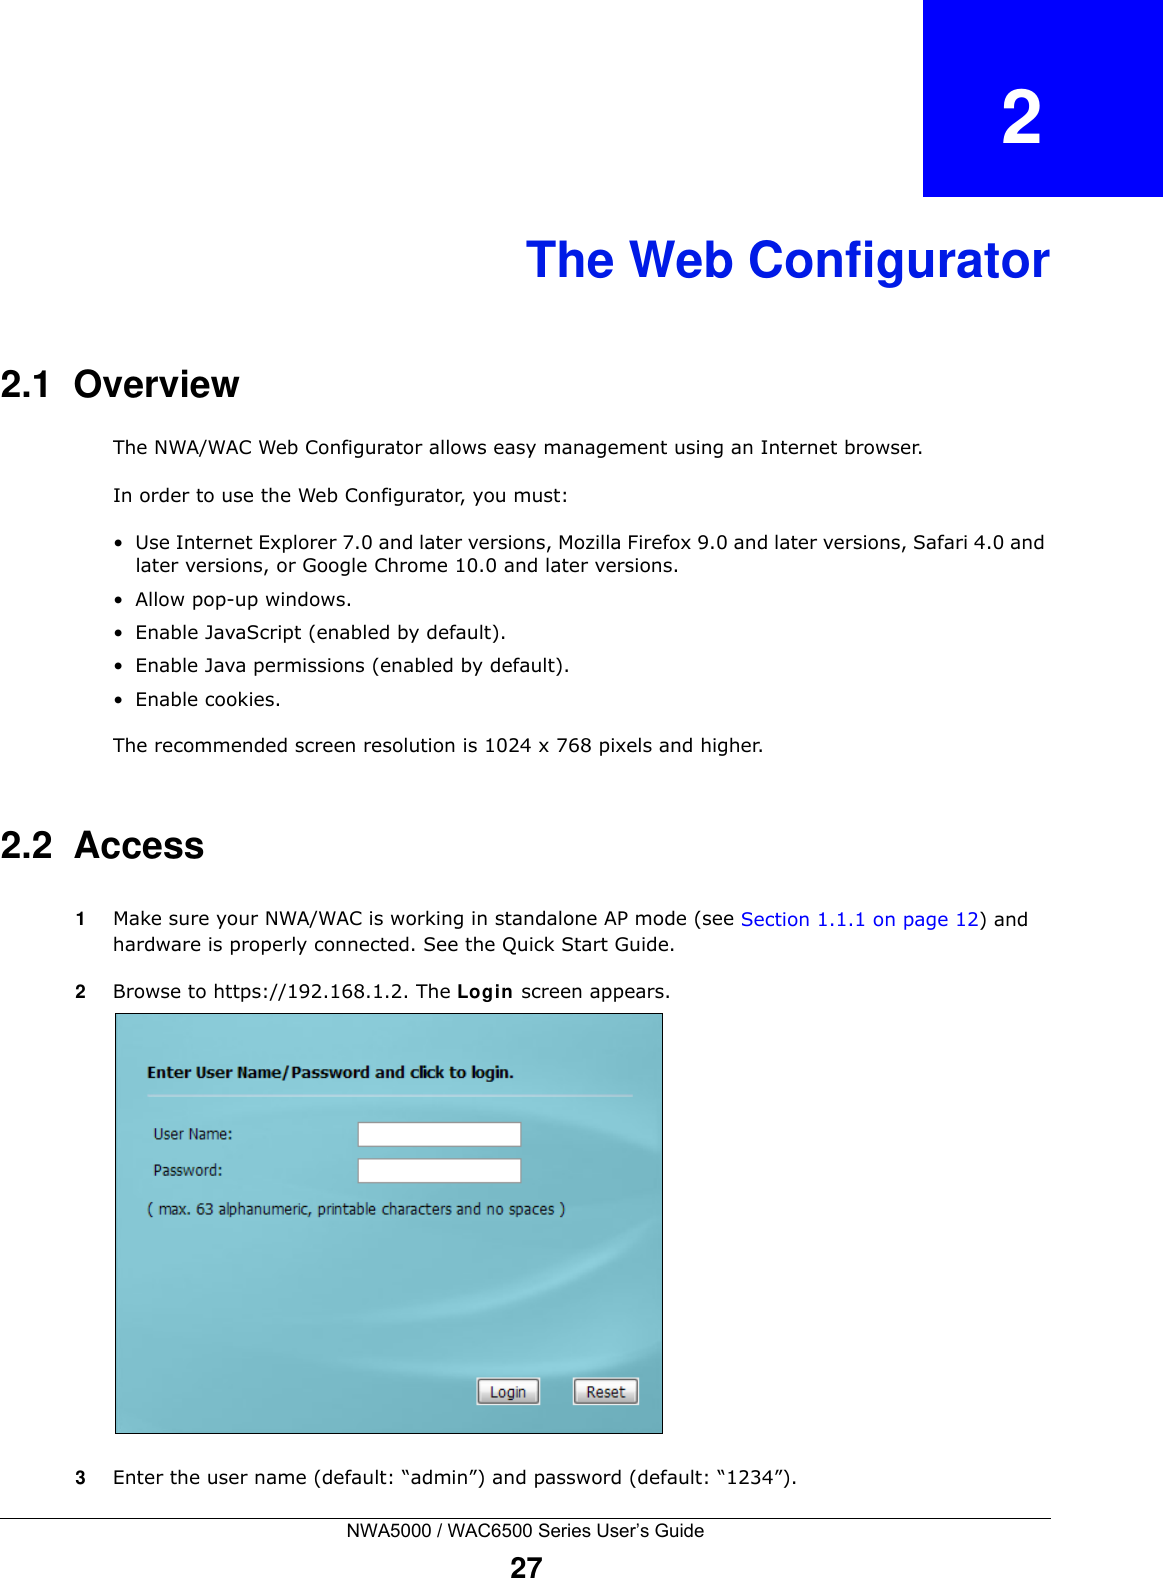 NWA5000 / WAC6500 Series User’s Guide27CHAPTER   2The Web Configurator2.1  OverviewThe NWA/WAC Web Configurator allows easy management using an Internet browser. In order to use the Web Configurator, you must:• Use Internet Explorer 7.0 and later versions, Mozilla Firefox 9.0 and later versions, Safari 4.0 and later versions, or Google Chrome 10.0 and later versions.• Allow pop-up windows.• Enable JavaScript (enabled by default).• Enable Java permissions (enabled by default).• Enable cookies.The recommended screen resolution is 1024 x 768 pixels and higher.2.2  Access1Make sure your NWA/WAC is working in standalone AP mode (see Section 1.1.1 on page 12) and hardware is properly connected. See the Quick Start Guide.2Browse to https://192.168.1.2. The Login  screen appears. 3Enter the user name (default: “admin”) and password (default: “1234”).